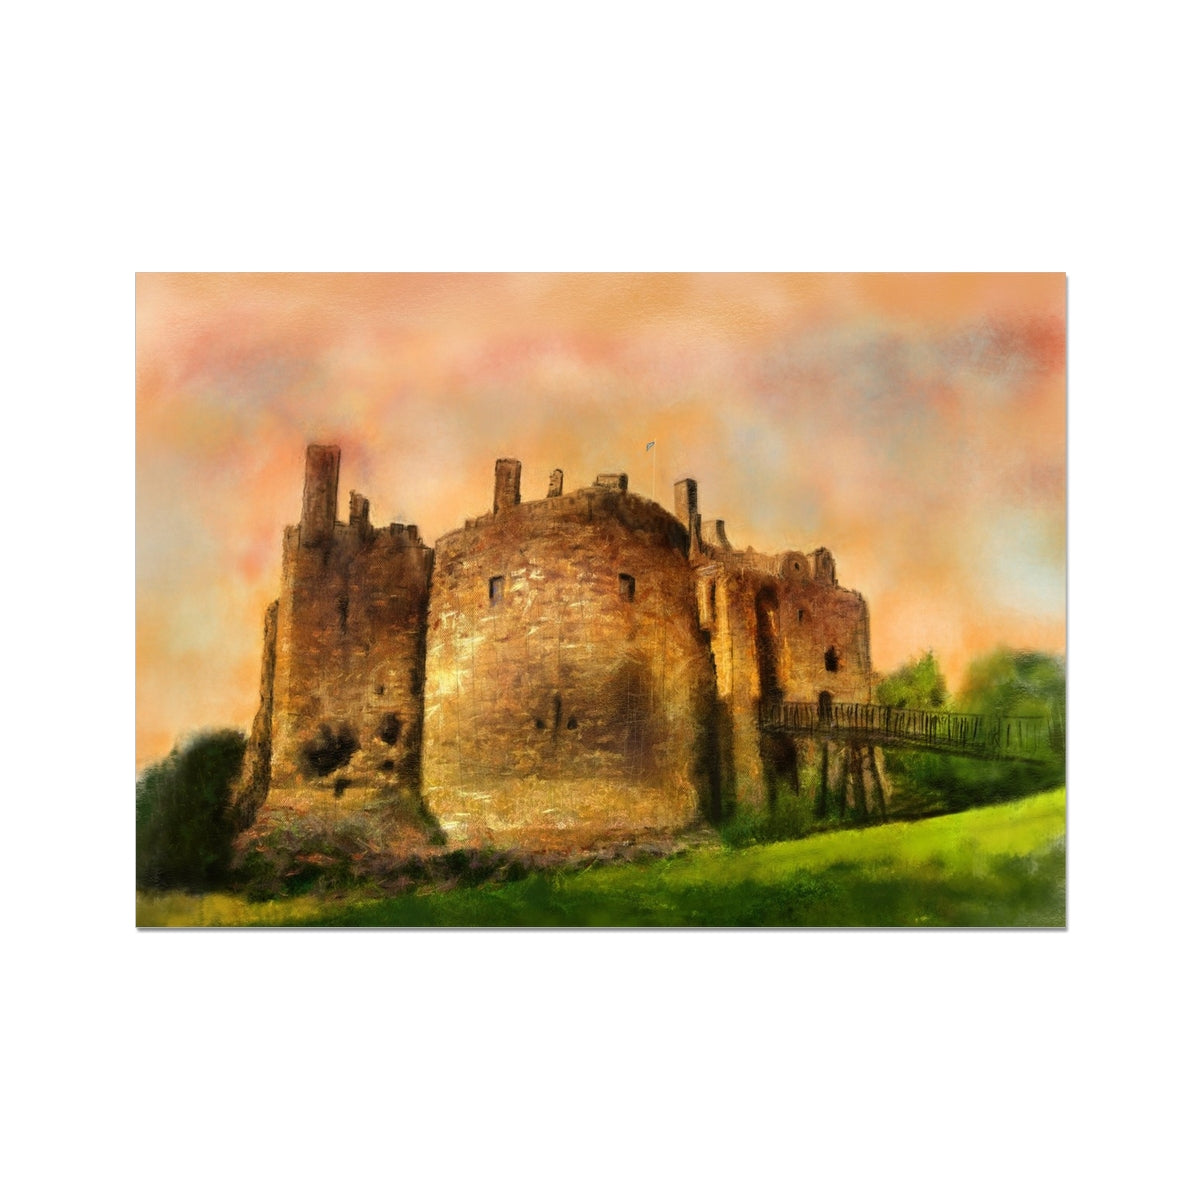 Dirleton Castle Dusk Painting | Fine Art Prints From Scotland-Unframed Prints-Historic & Iconic Scotland Art Gallery-A2 Landscape-Paintings, Prints, Homeware, Art Gifts From Scotland By Scottish Artist Kevin Hunter